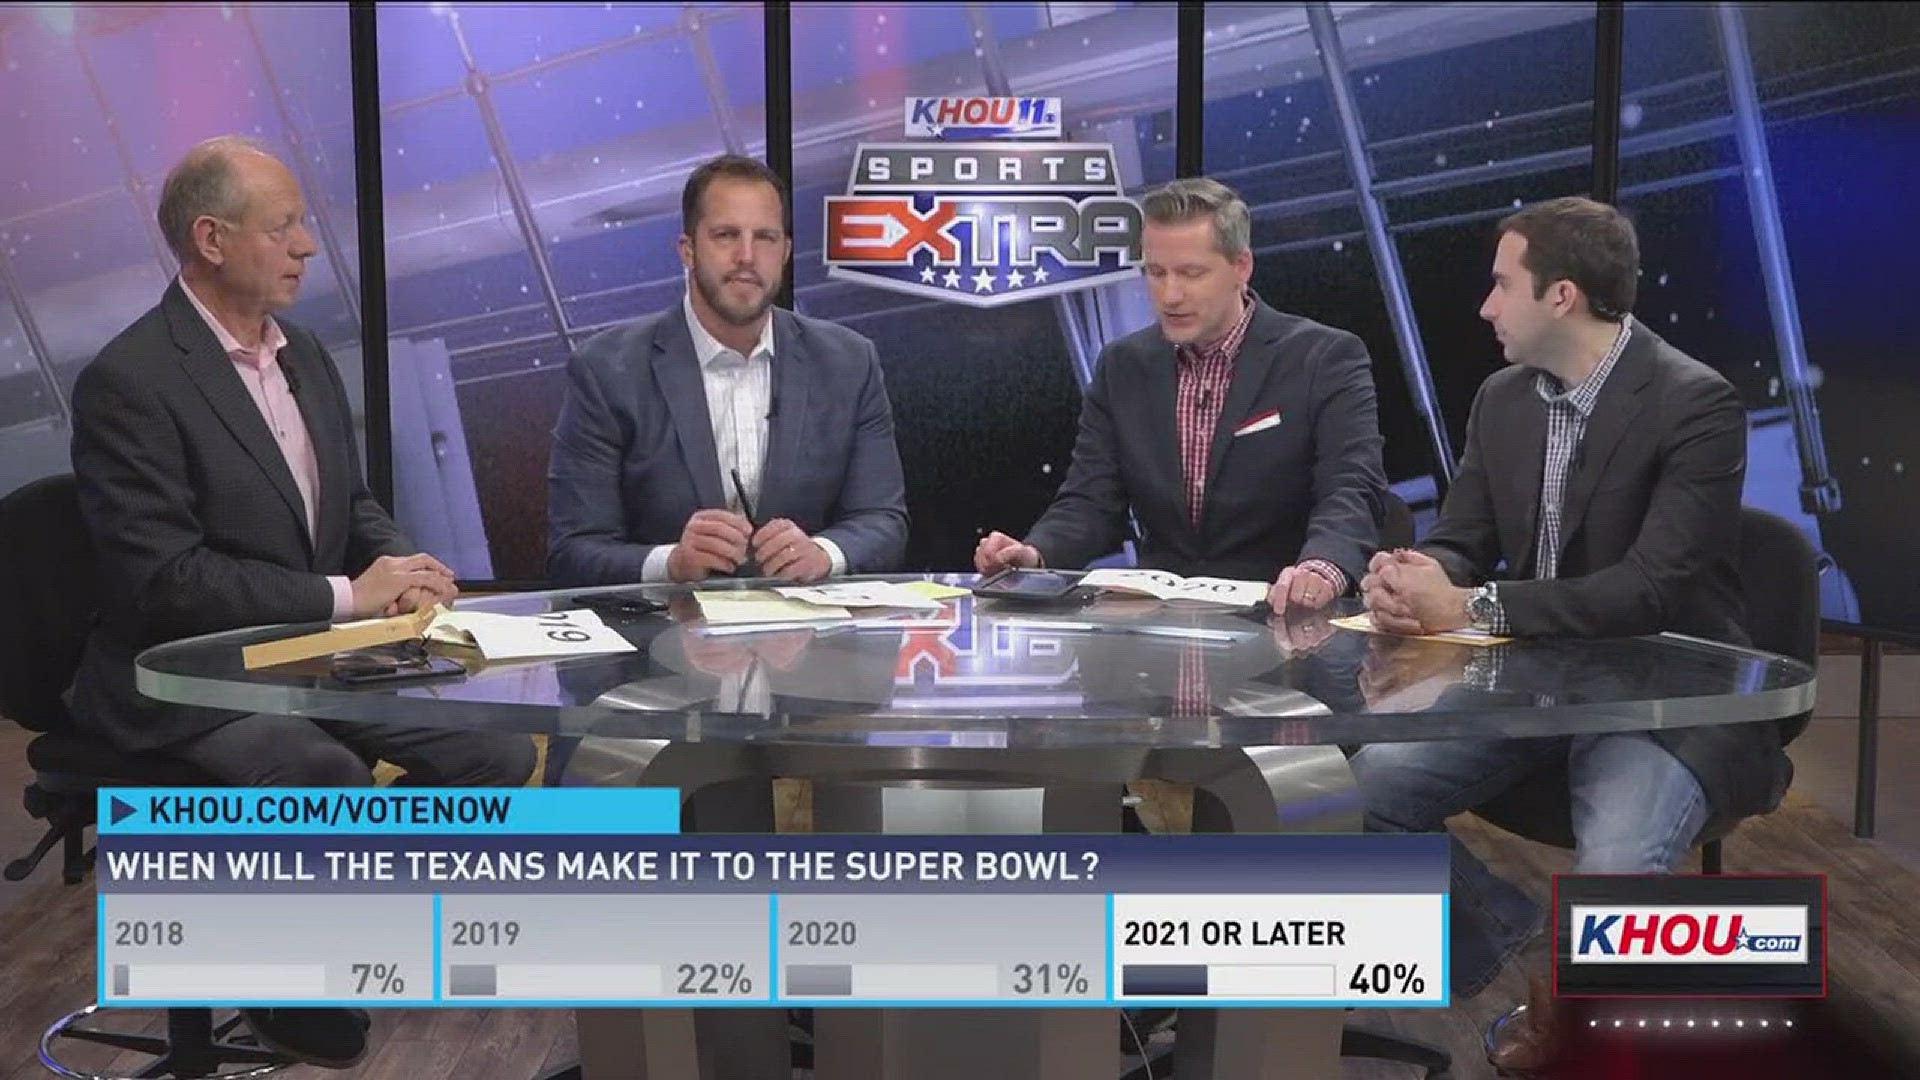 The SportsExtra team debates which year the Texans could finally make it to the big game.